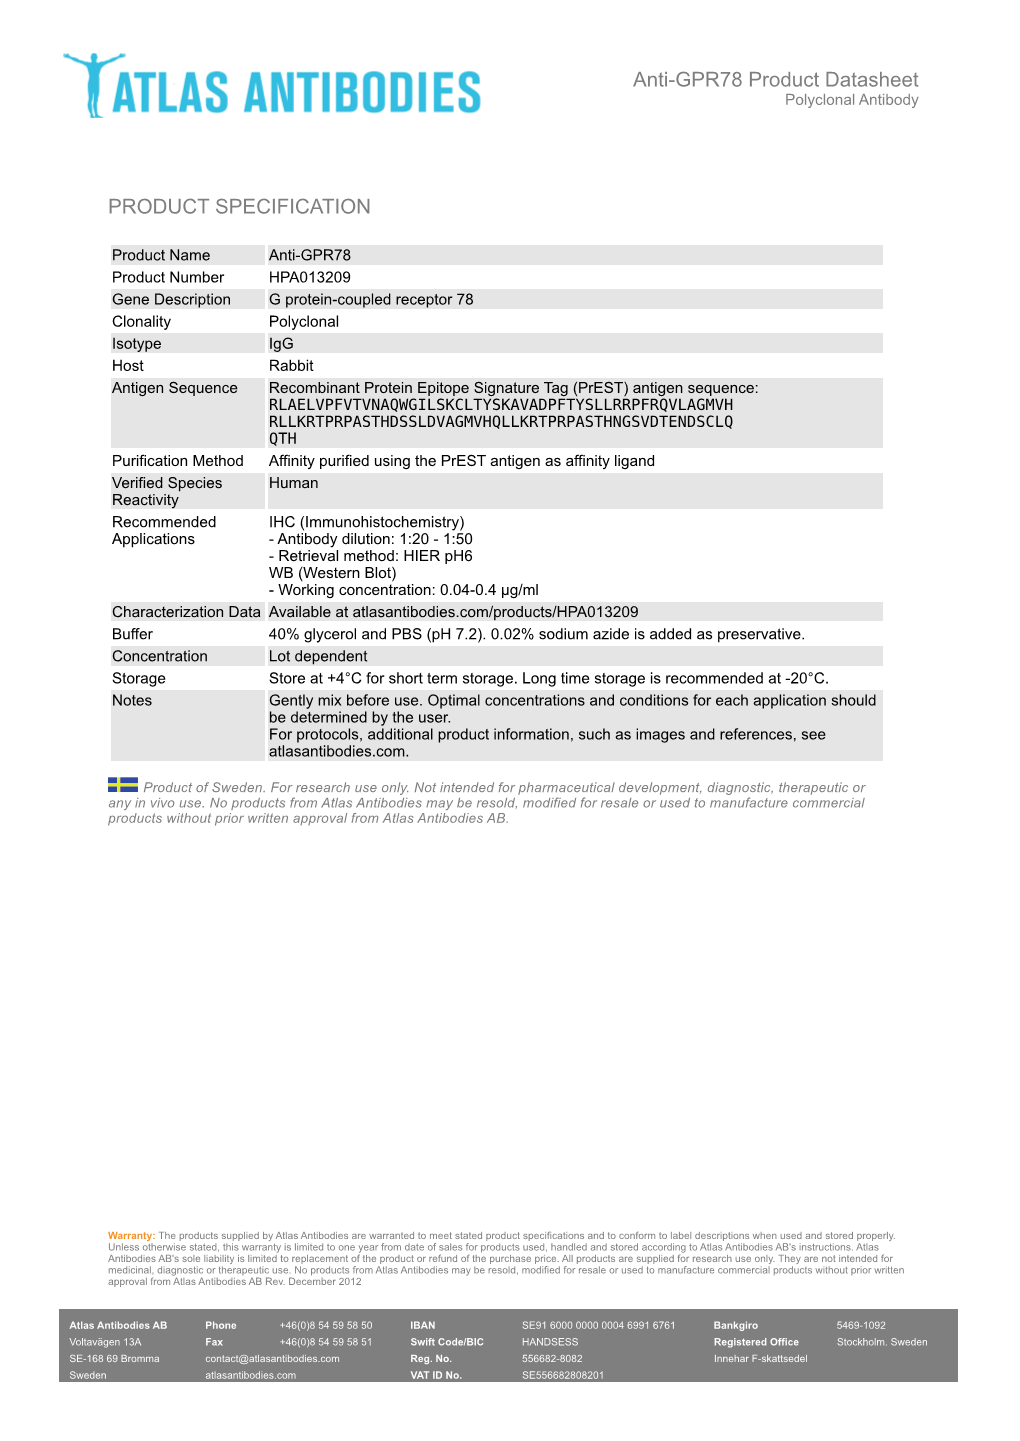 PRODUCT SPECIFICATION Anti-GPR78 Product Datasheet